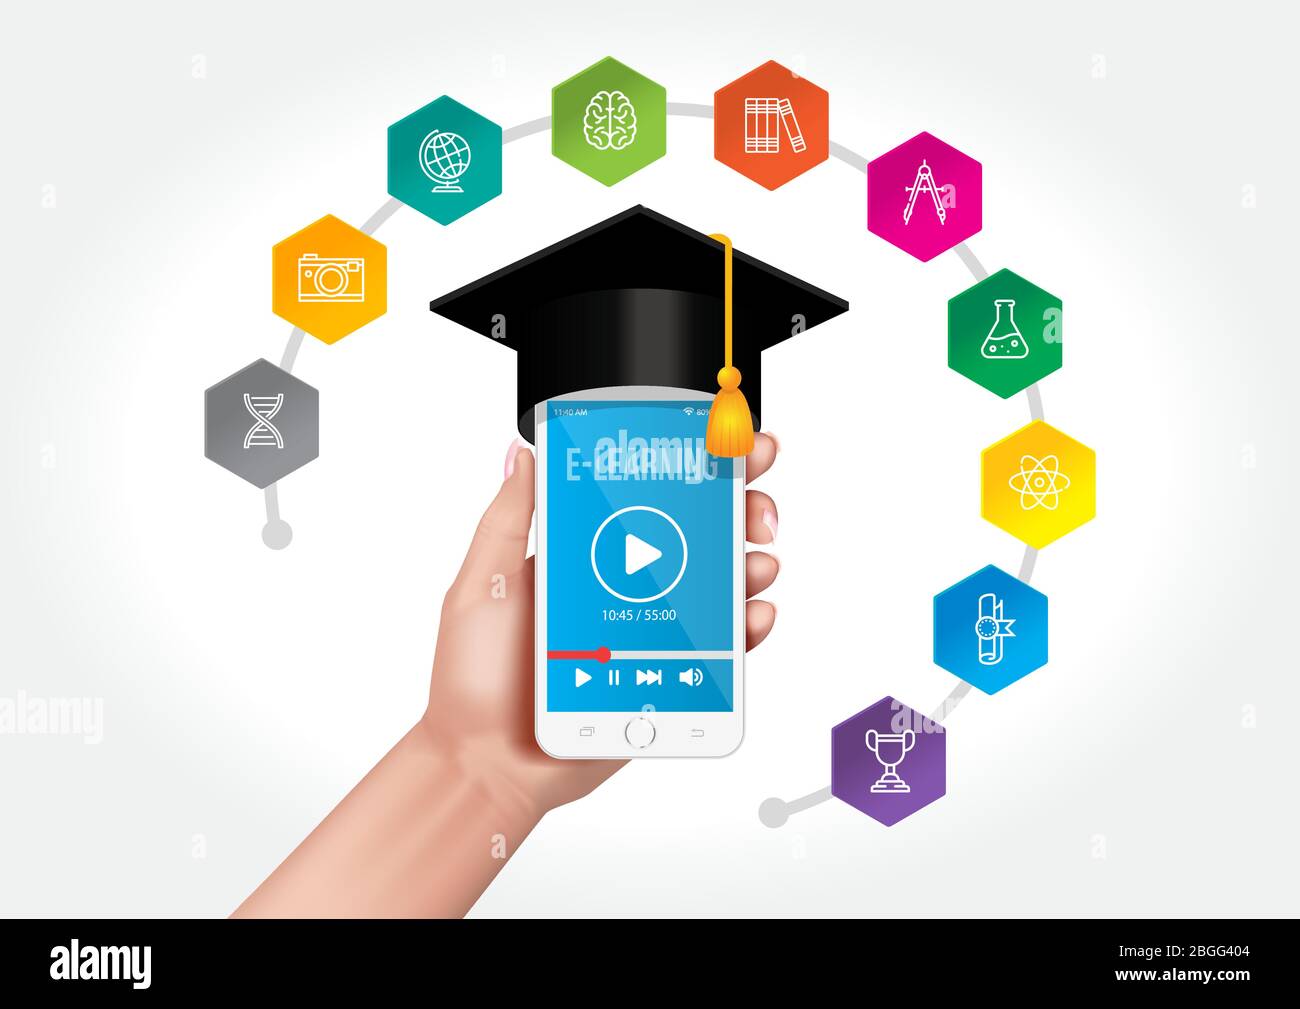 Internet network on your smartphone as a knowledge base. The concept of e-learning. Stock Vector